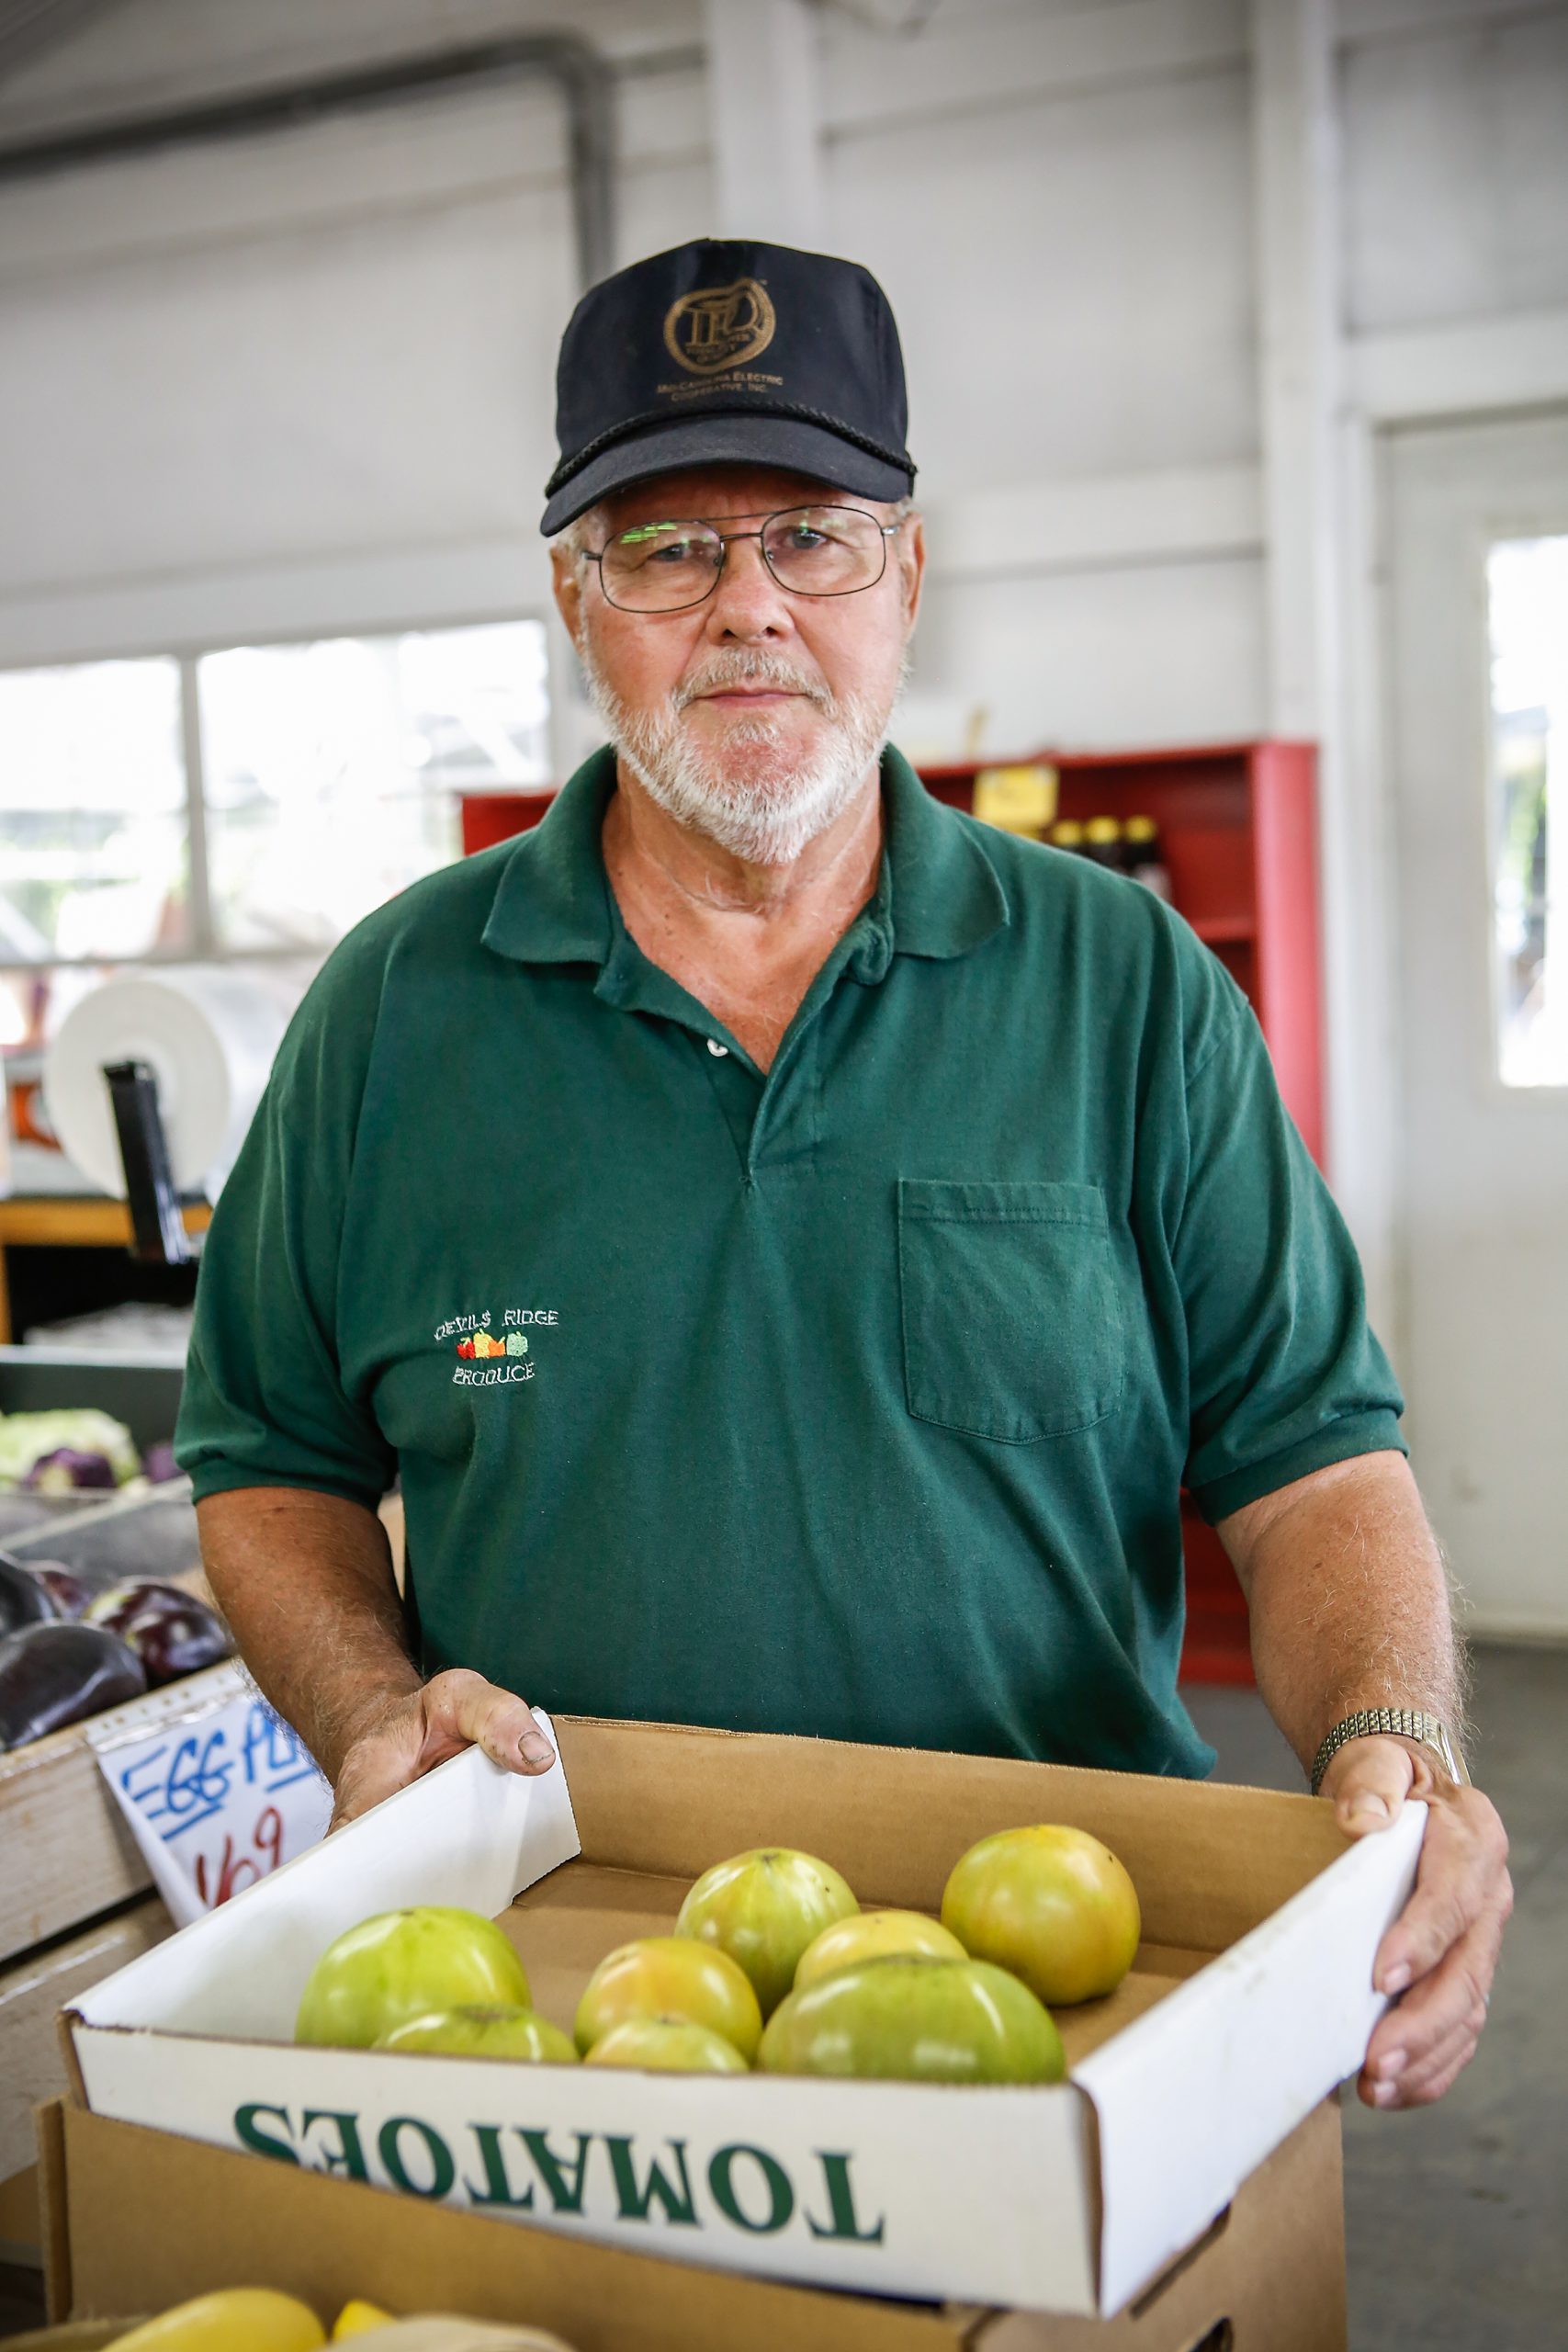 Glen Kool has been farming for a little more than a year and has worked around the pandemic by staying closer to home.